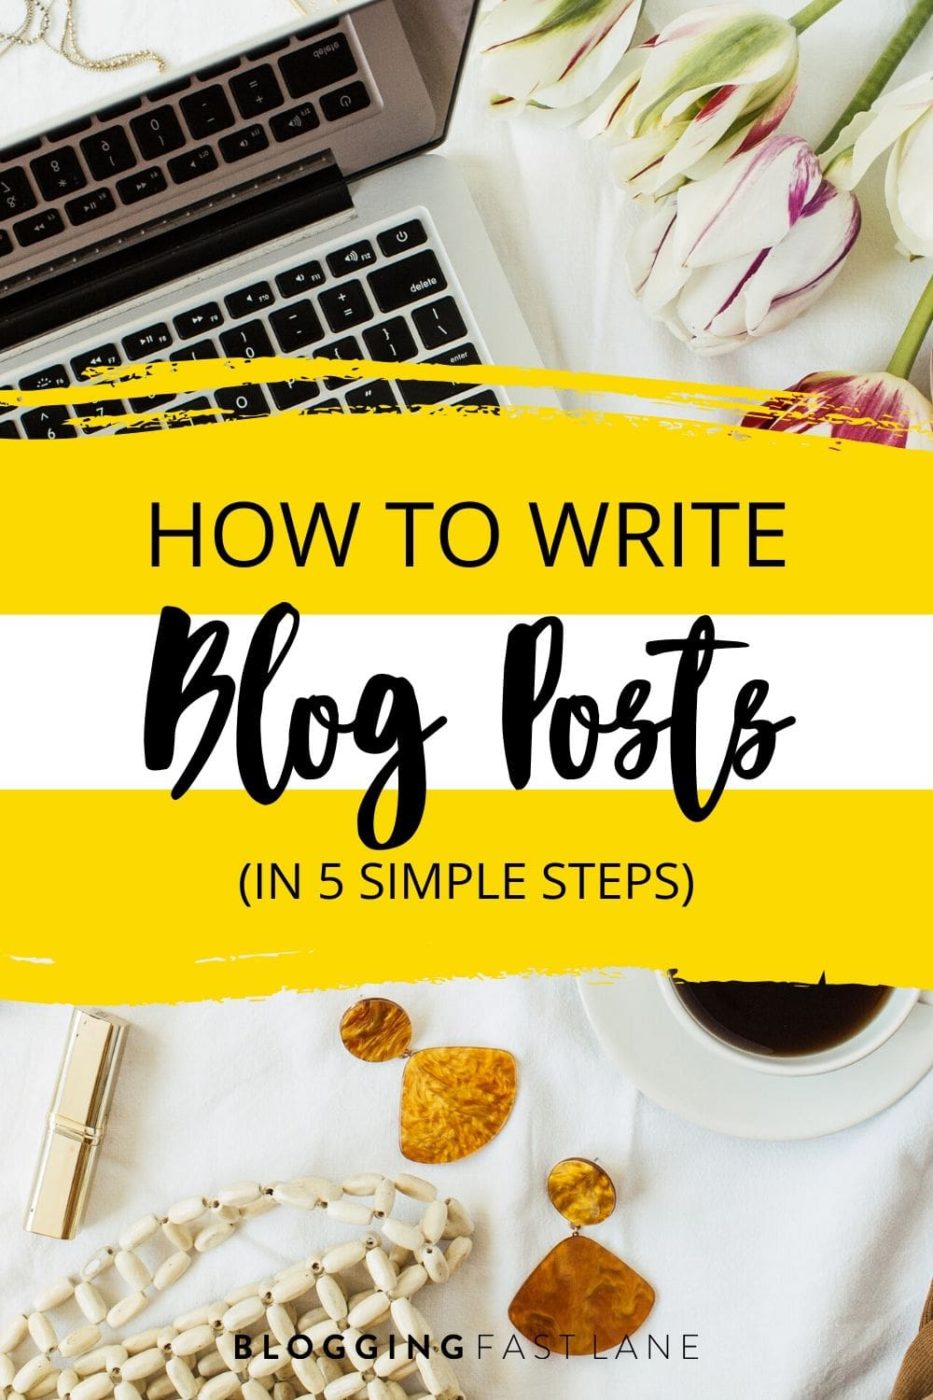 How to Write a Blog Post | Content is everything when it comes to your blog... Check out our 5 step guide on how to write a blog post that's meaningful to your readers. 